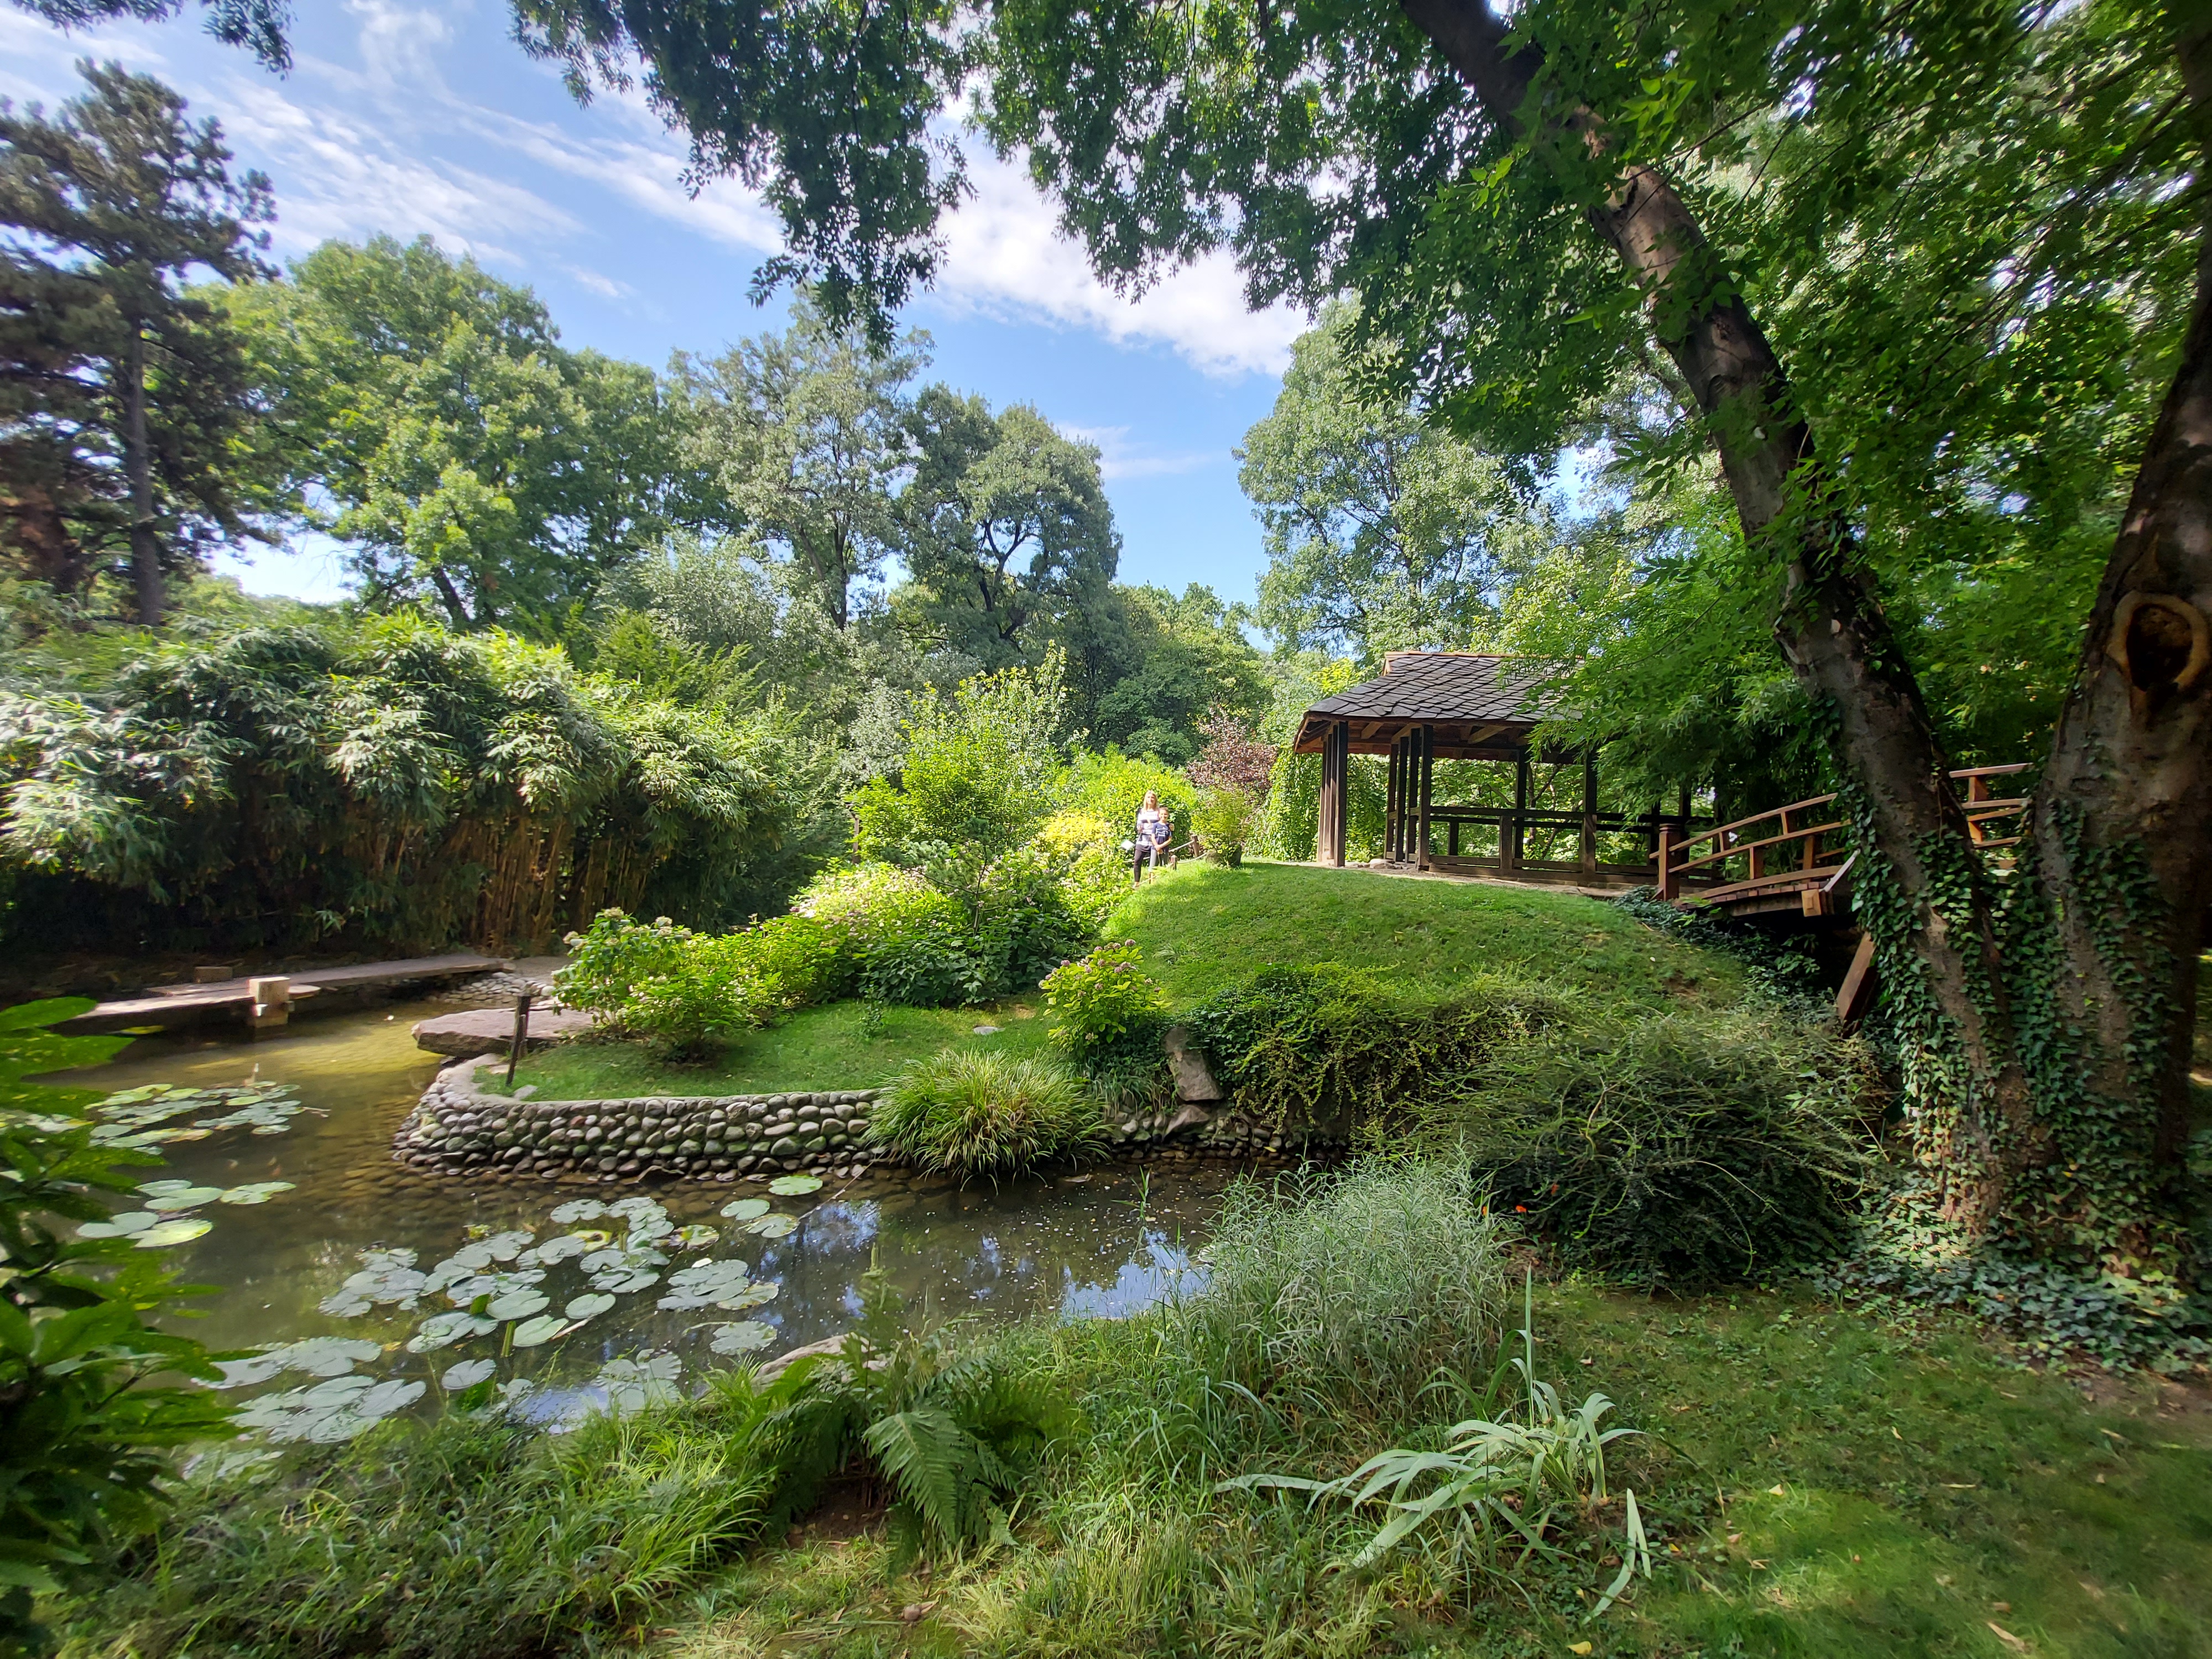 Picture of a place: Jevremovac Botanical Garden